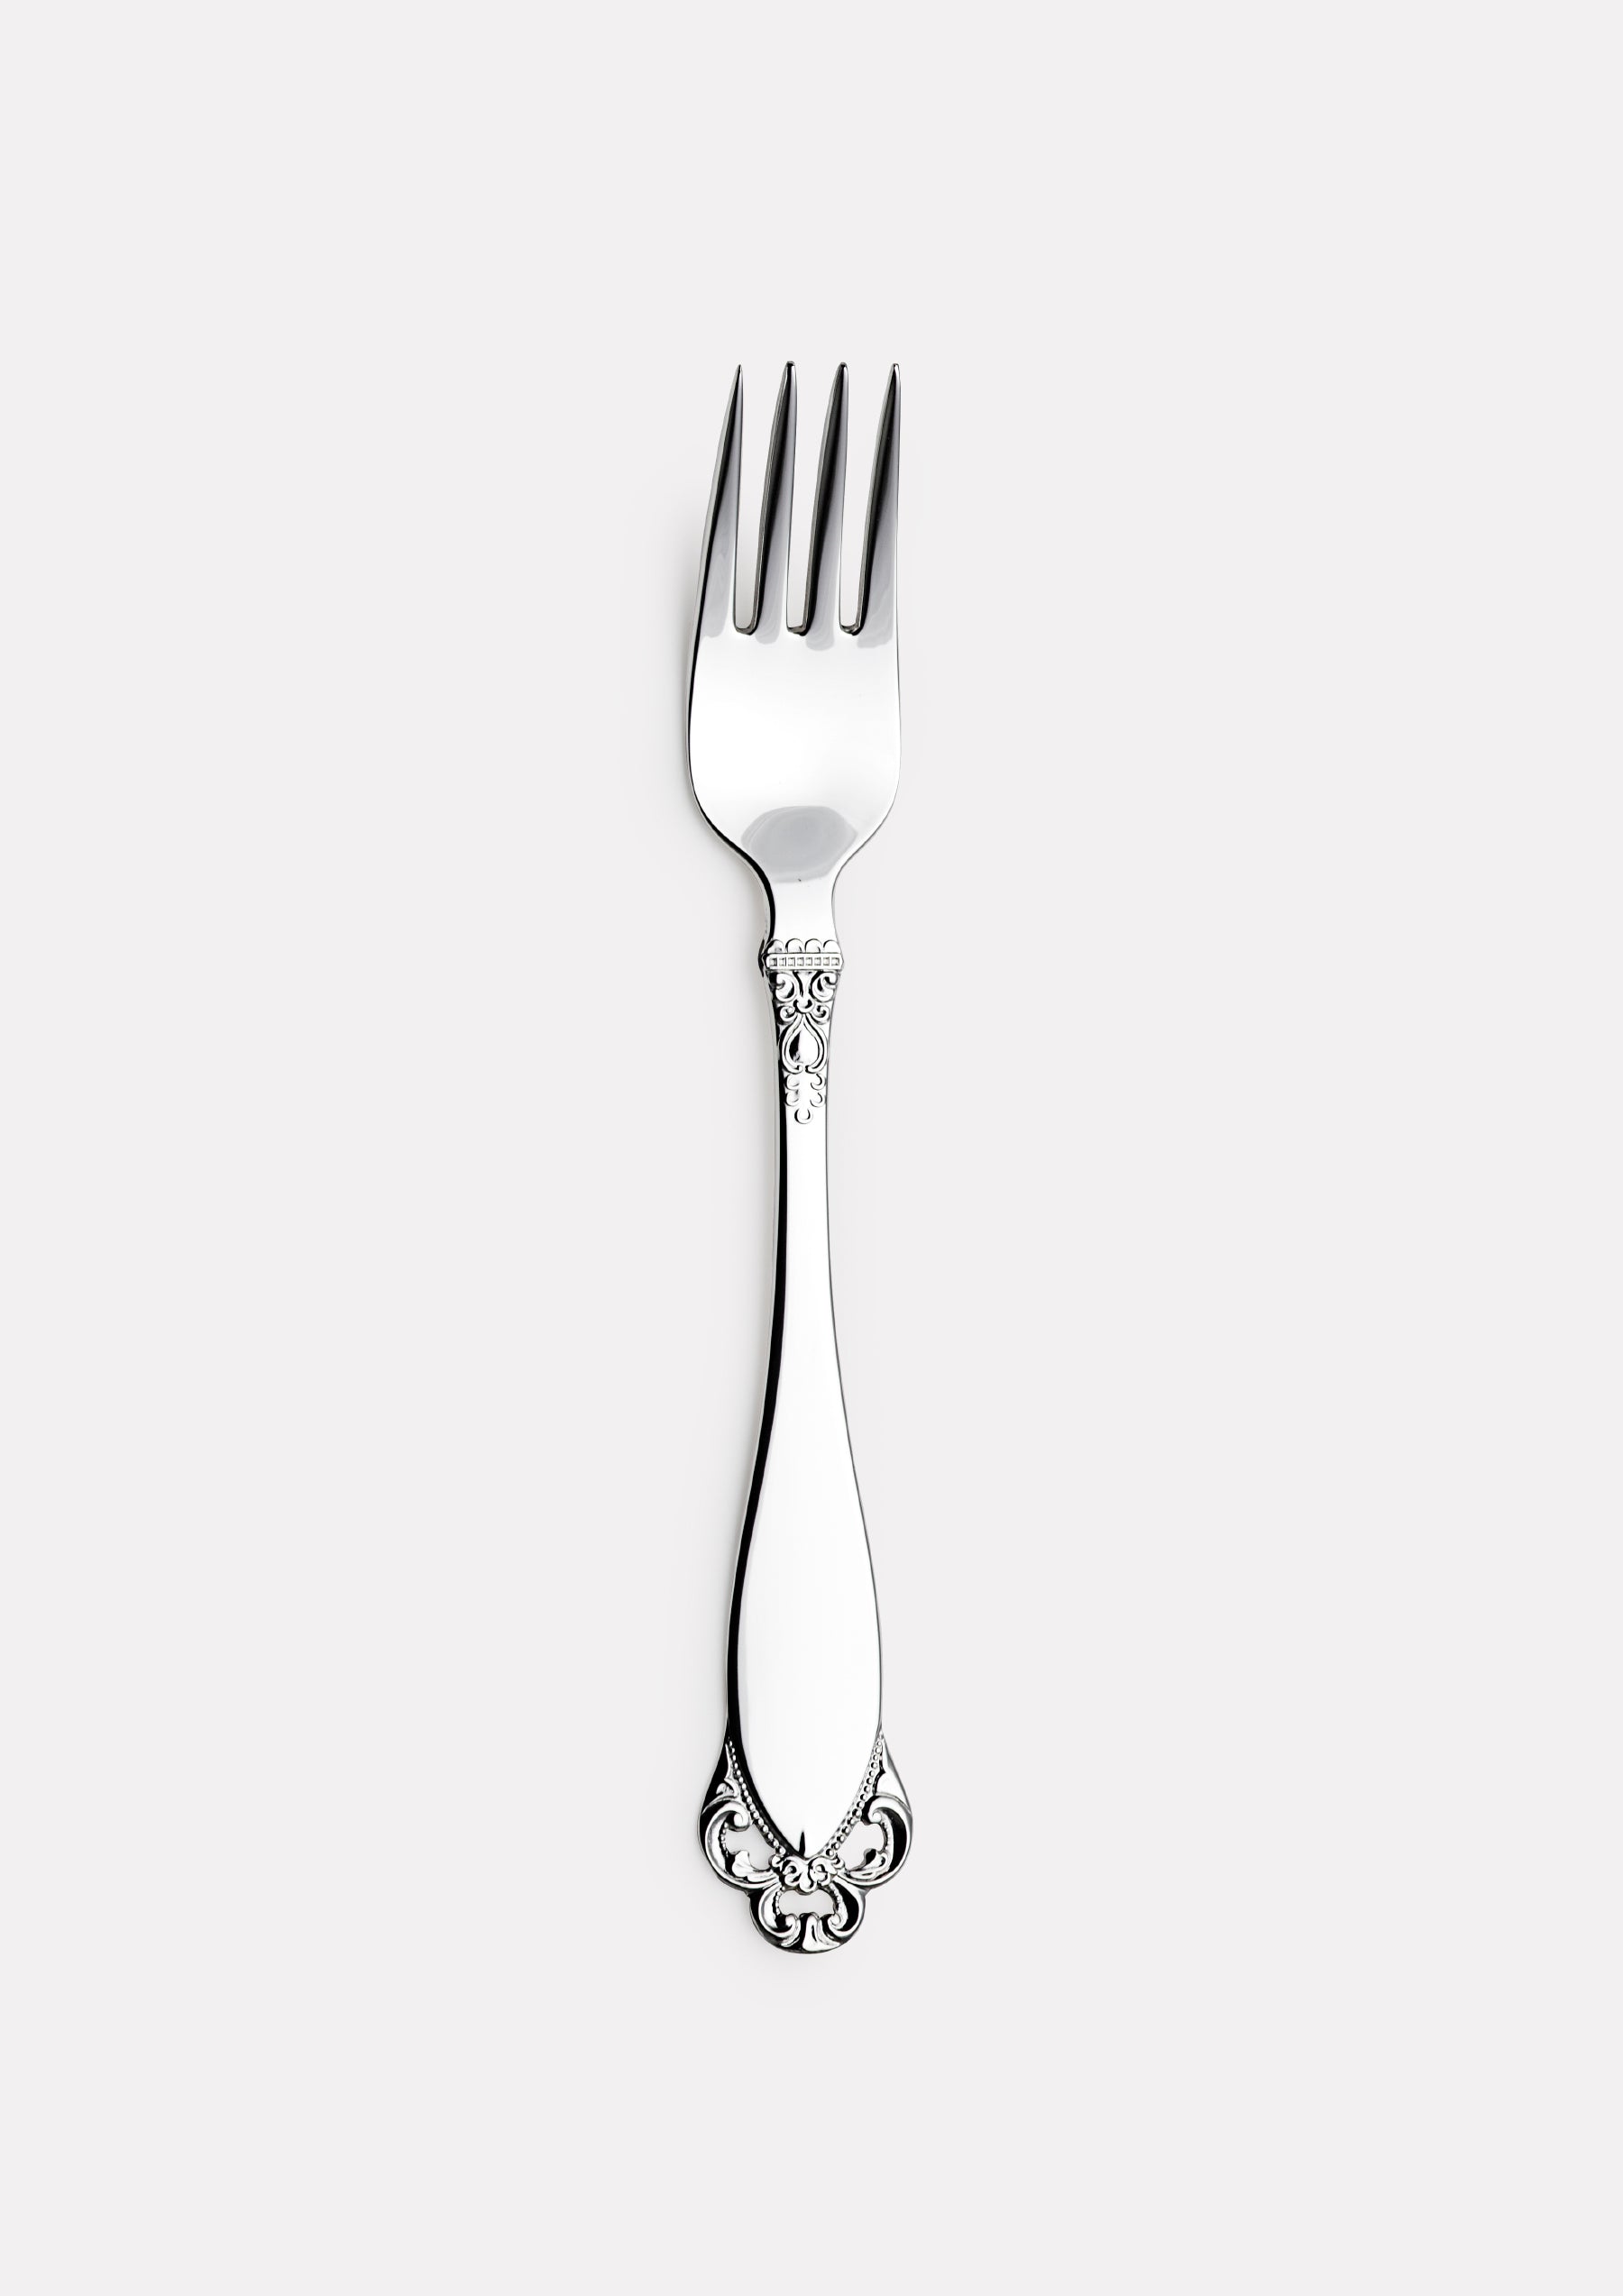 Laila small dining fork